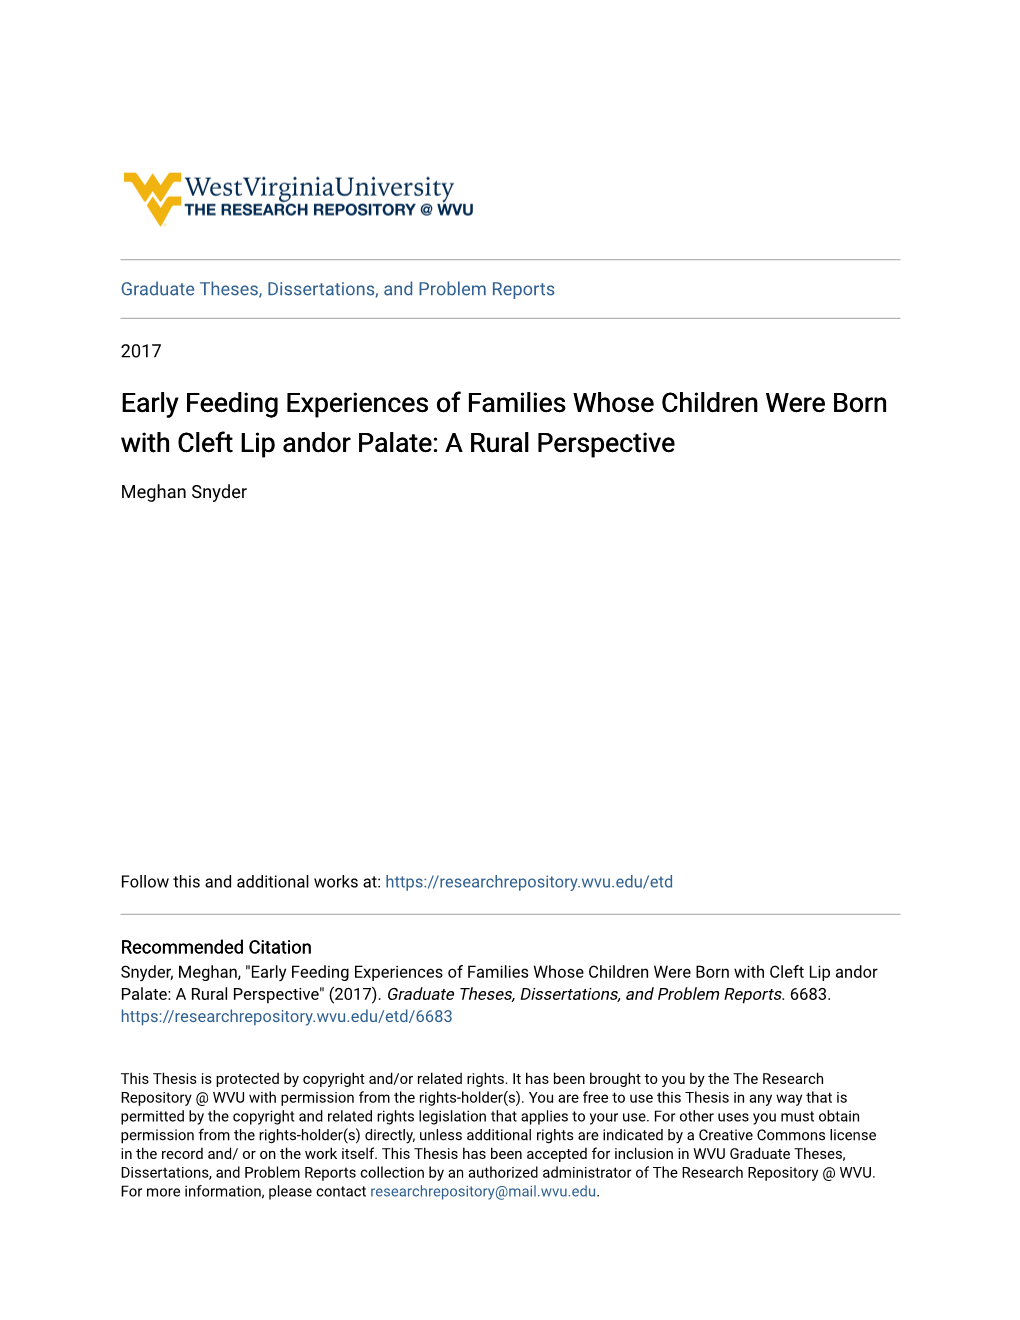 Early Feeding Experiences of Families Whose Children Were Born with Cleft Lip Andor Palate: a Rural Perspective